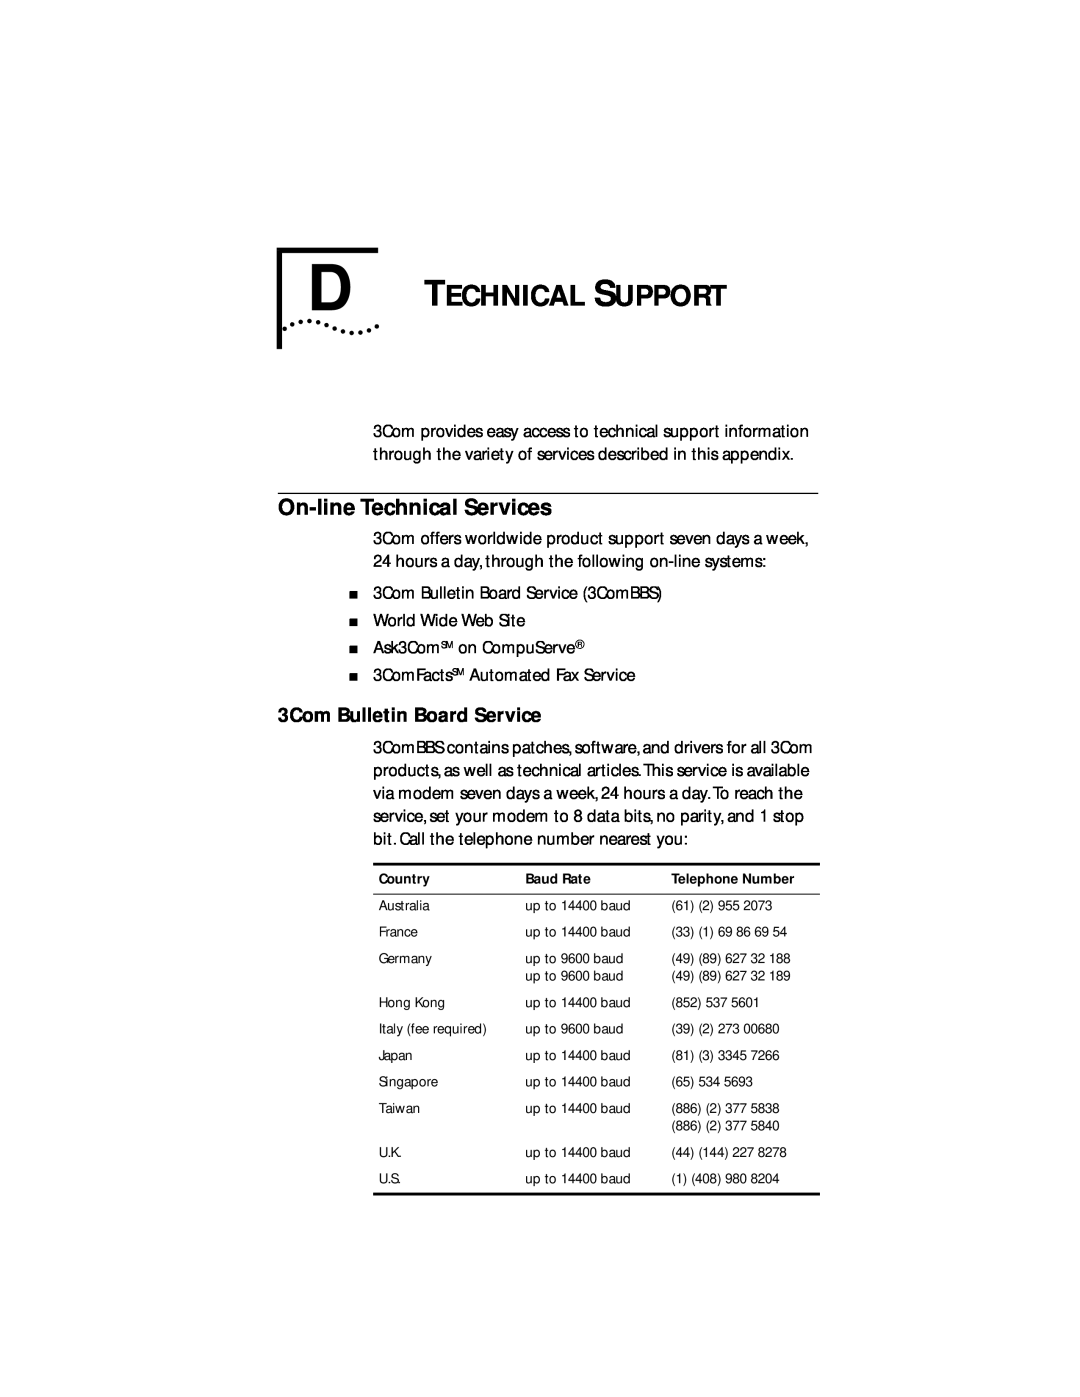 IBM 09-0572-000 manual D Technical Support, On-line Technical Services, 3Com Bulletin Board Service 